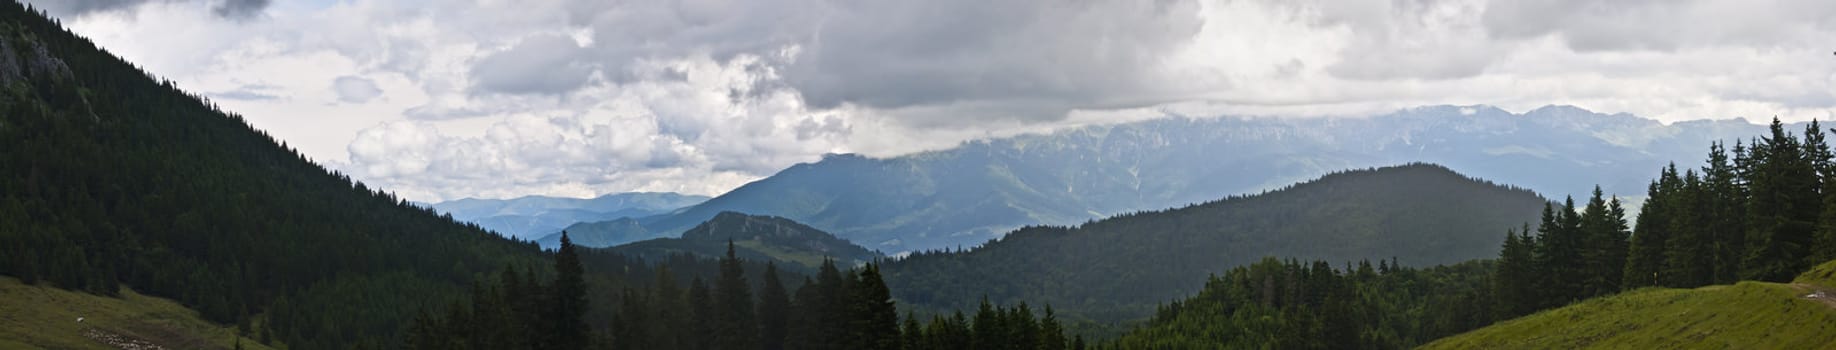 Panorama background in Carpathians. Beautiful mountains and landscape in Romania.